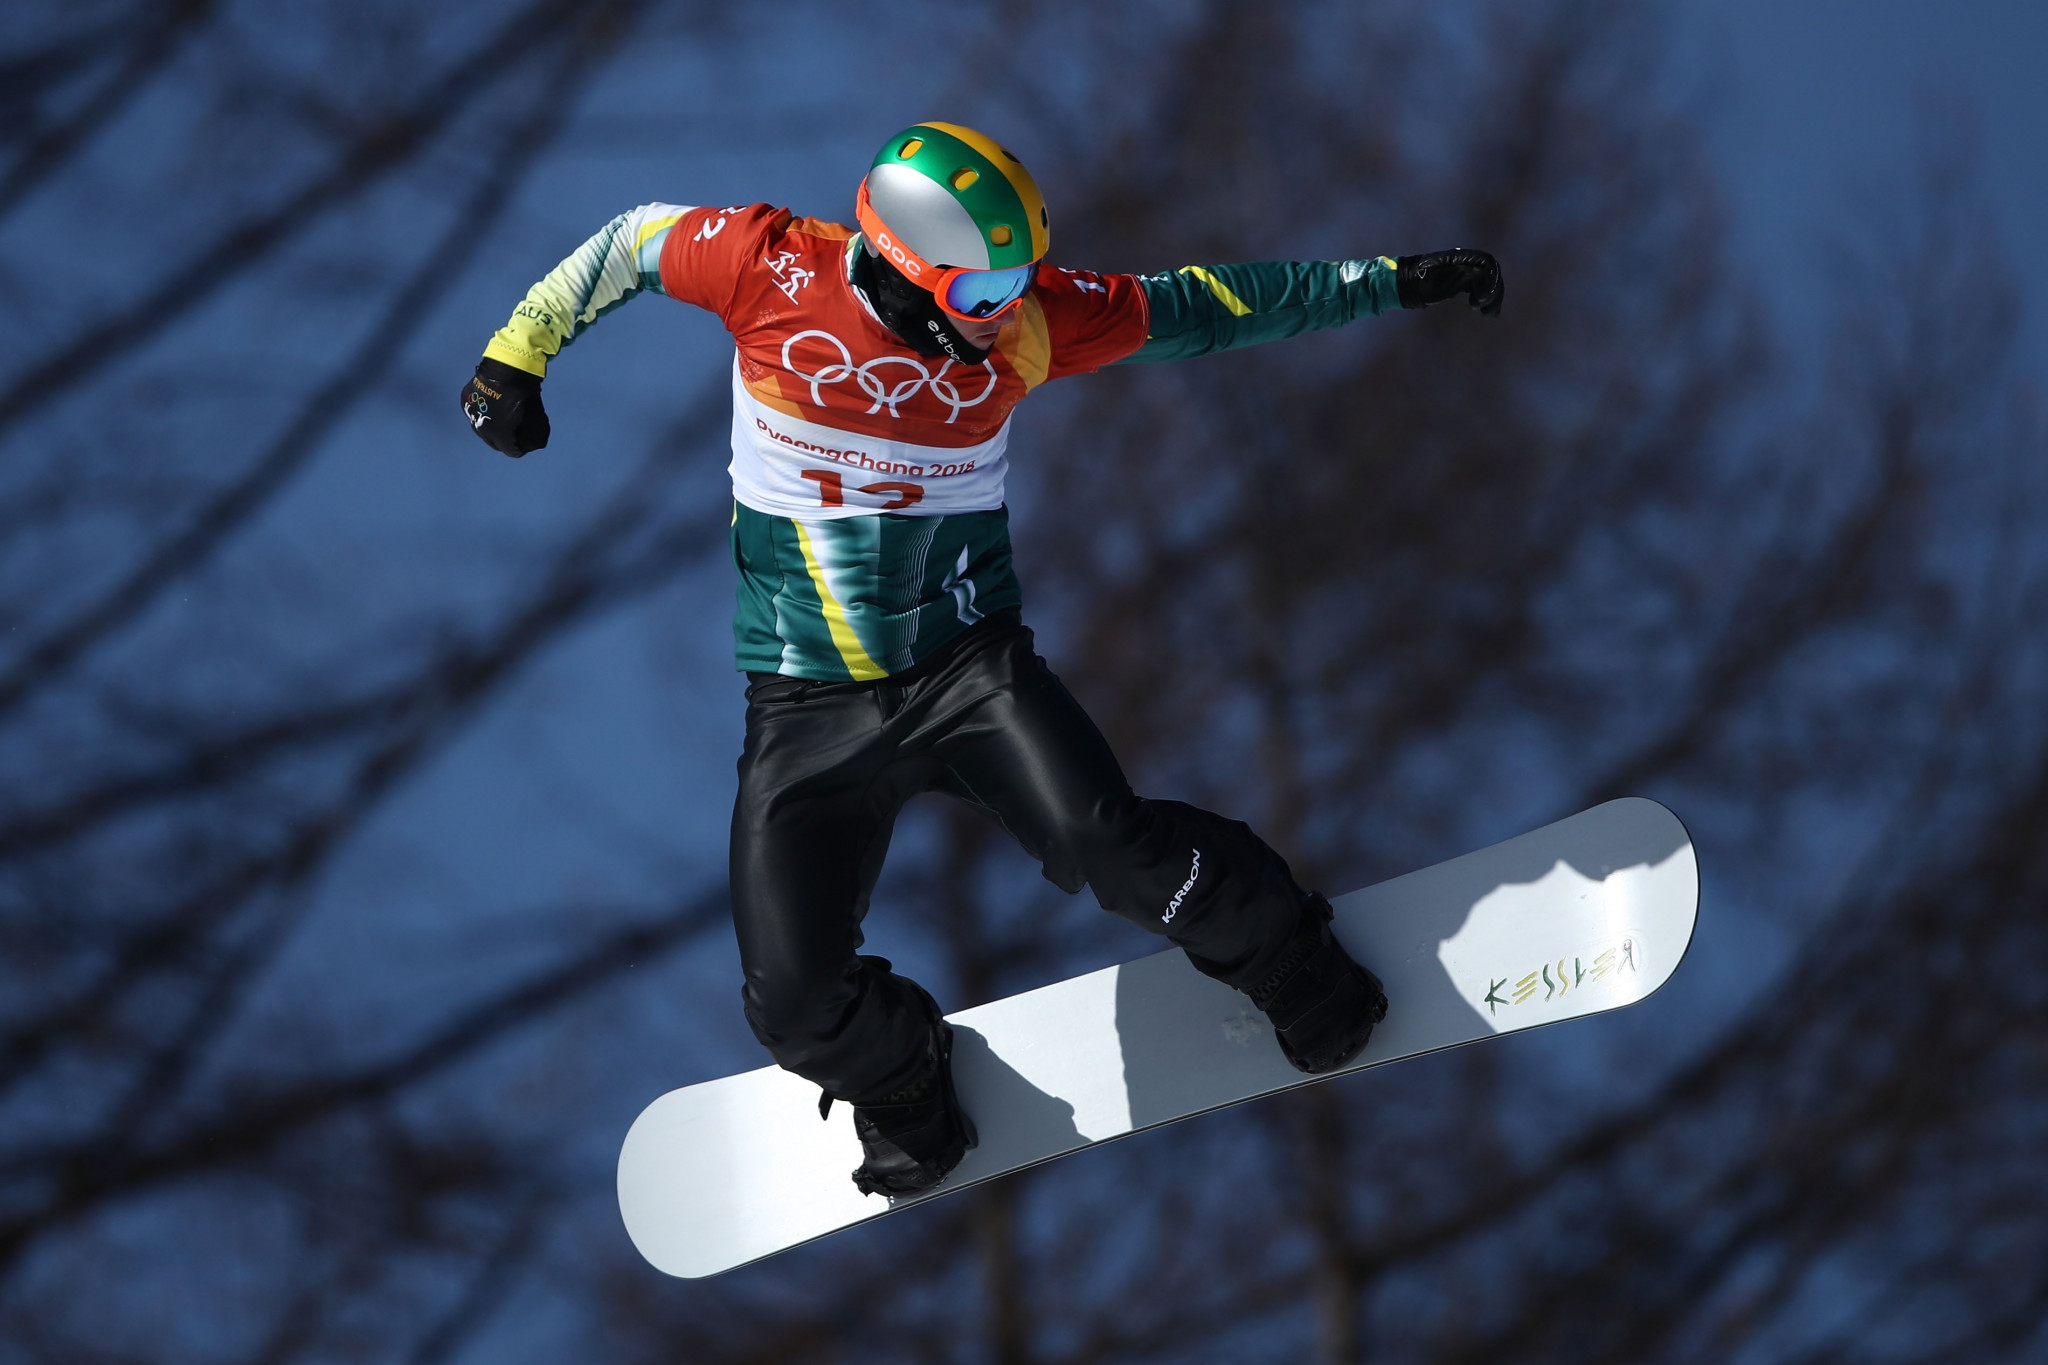 Medal-winning performances from the likes of snowboarder Jarryd Hughes have helped lead to unexpectedly high television viewing figures in Australia ©Getty Images